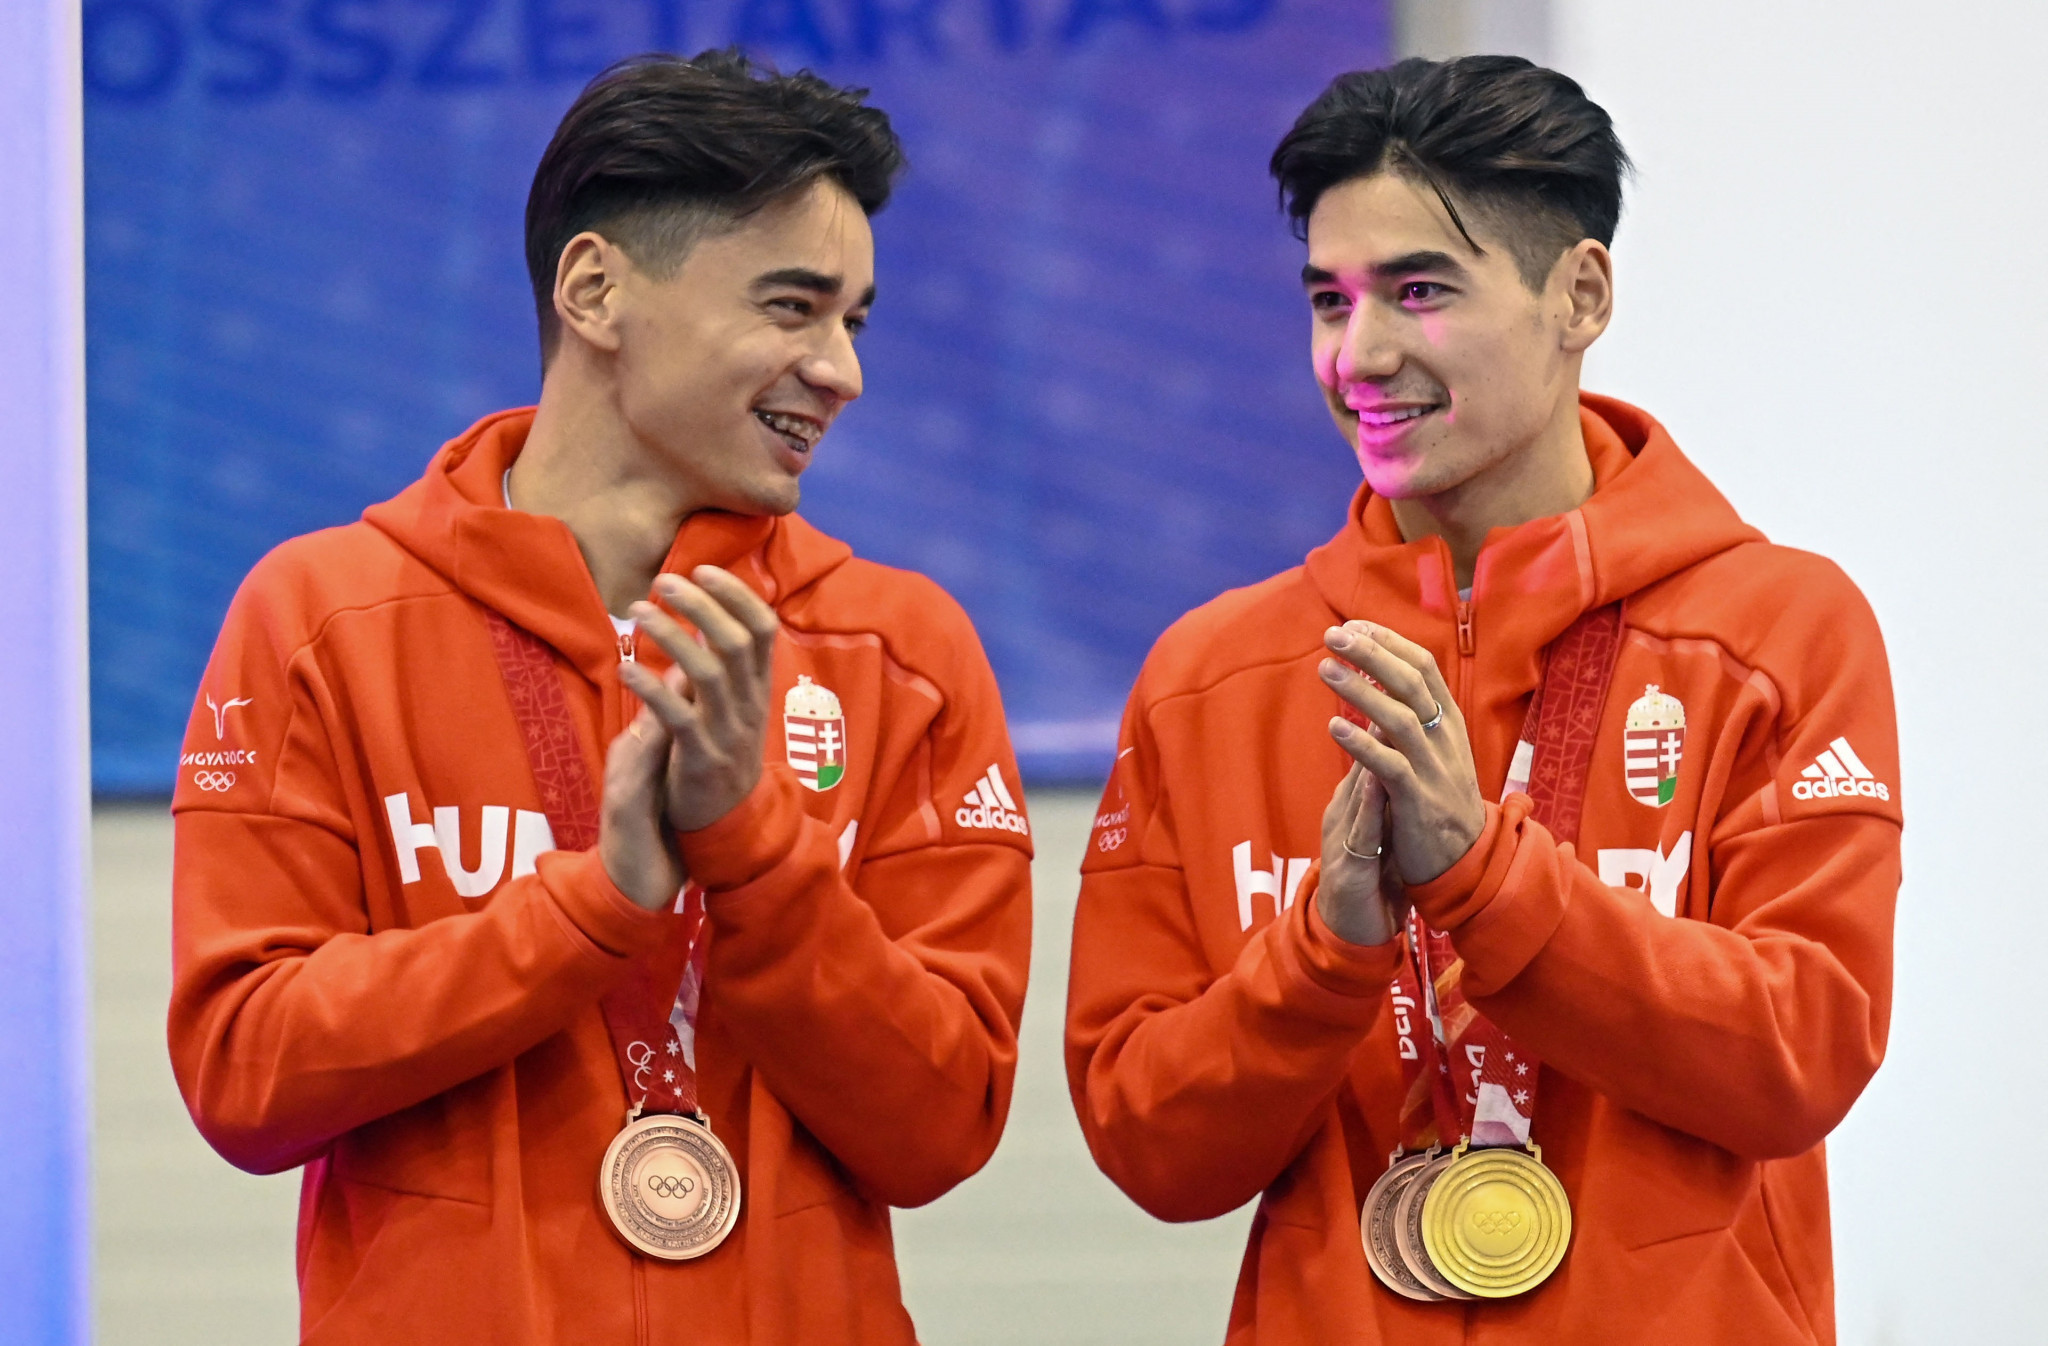 Liu brothers in China's squad after Hungary switch before Milan Cortina 2026